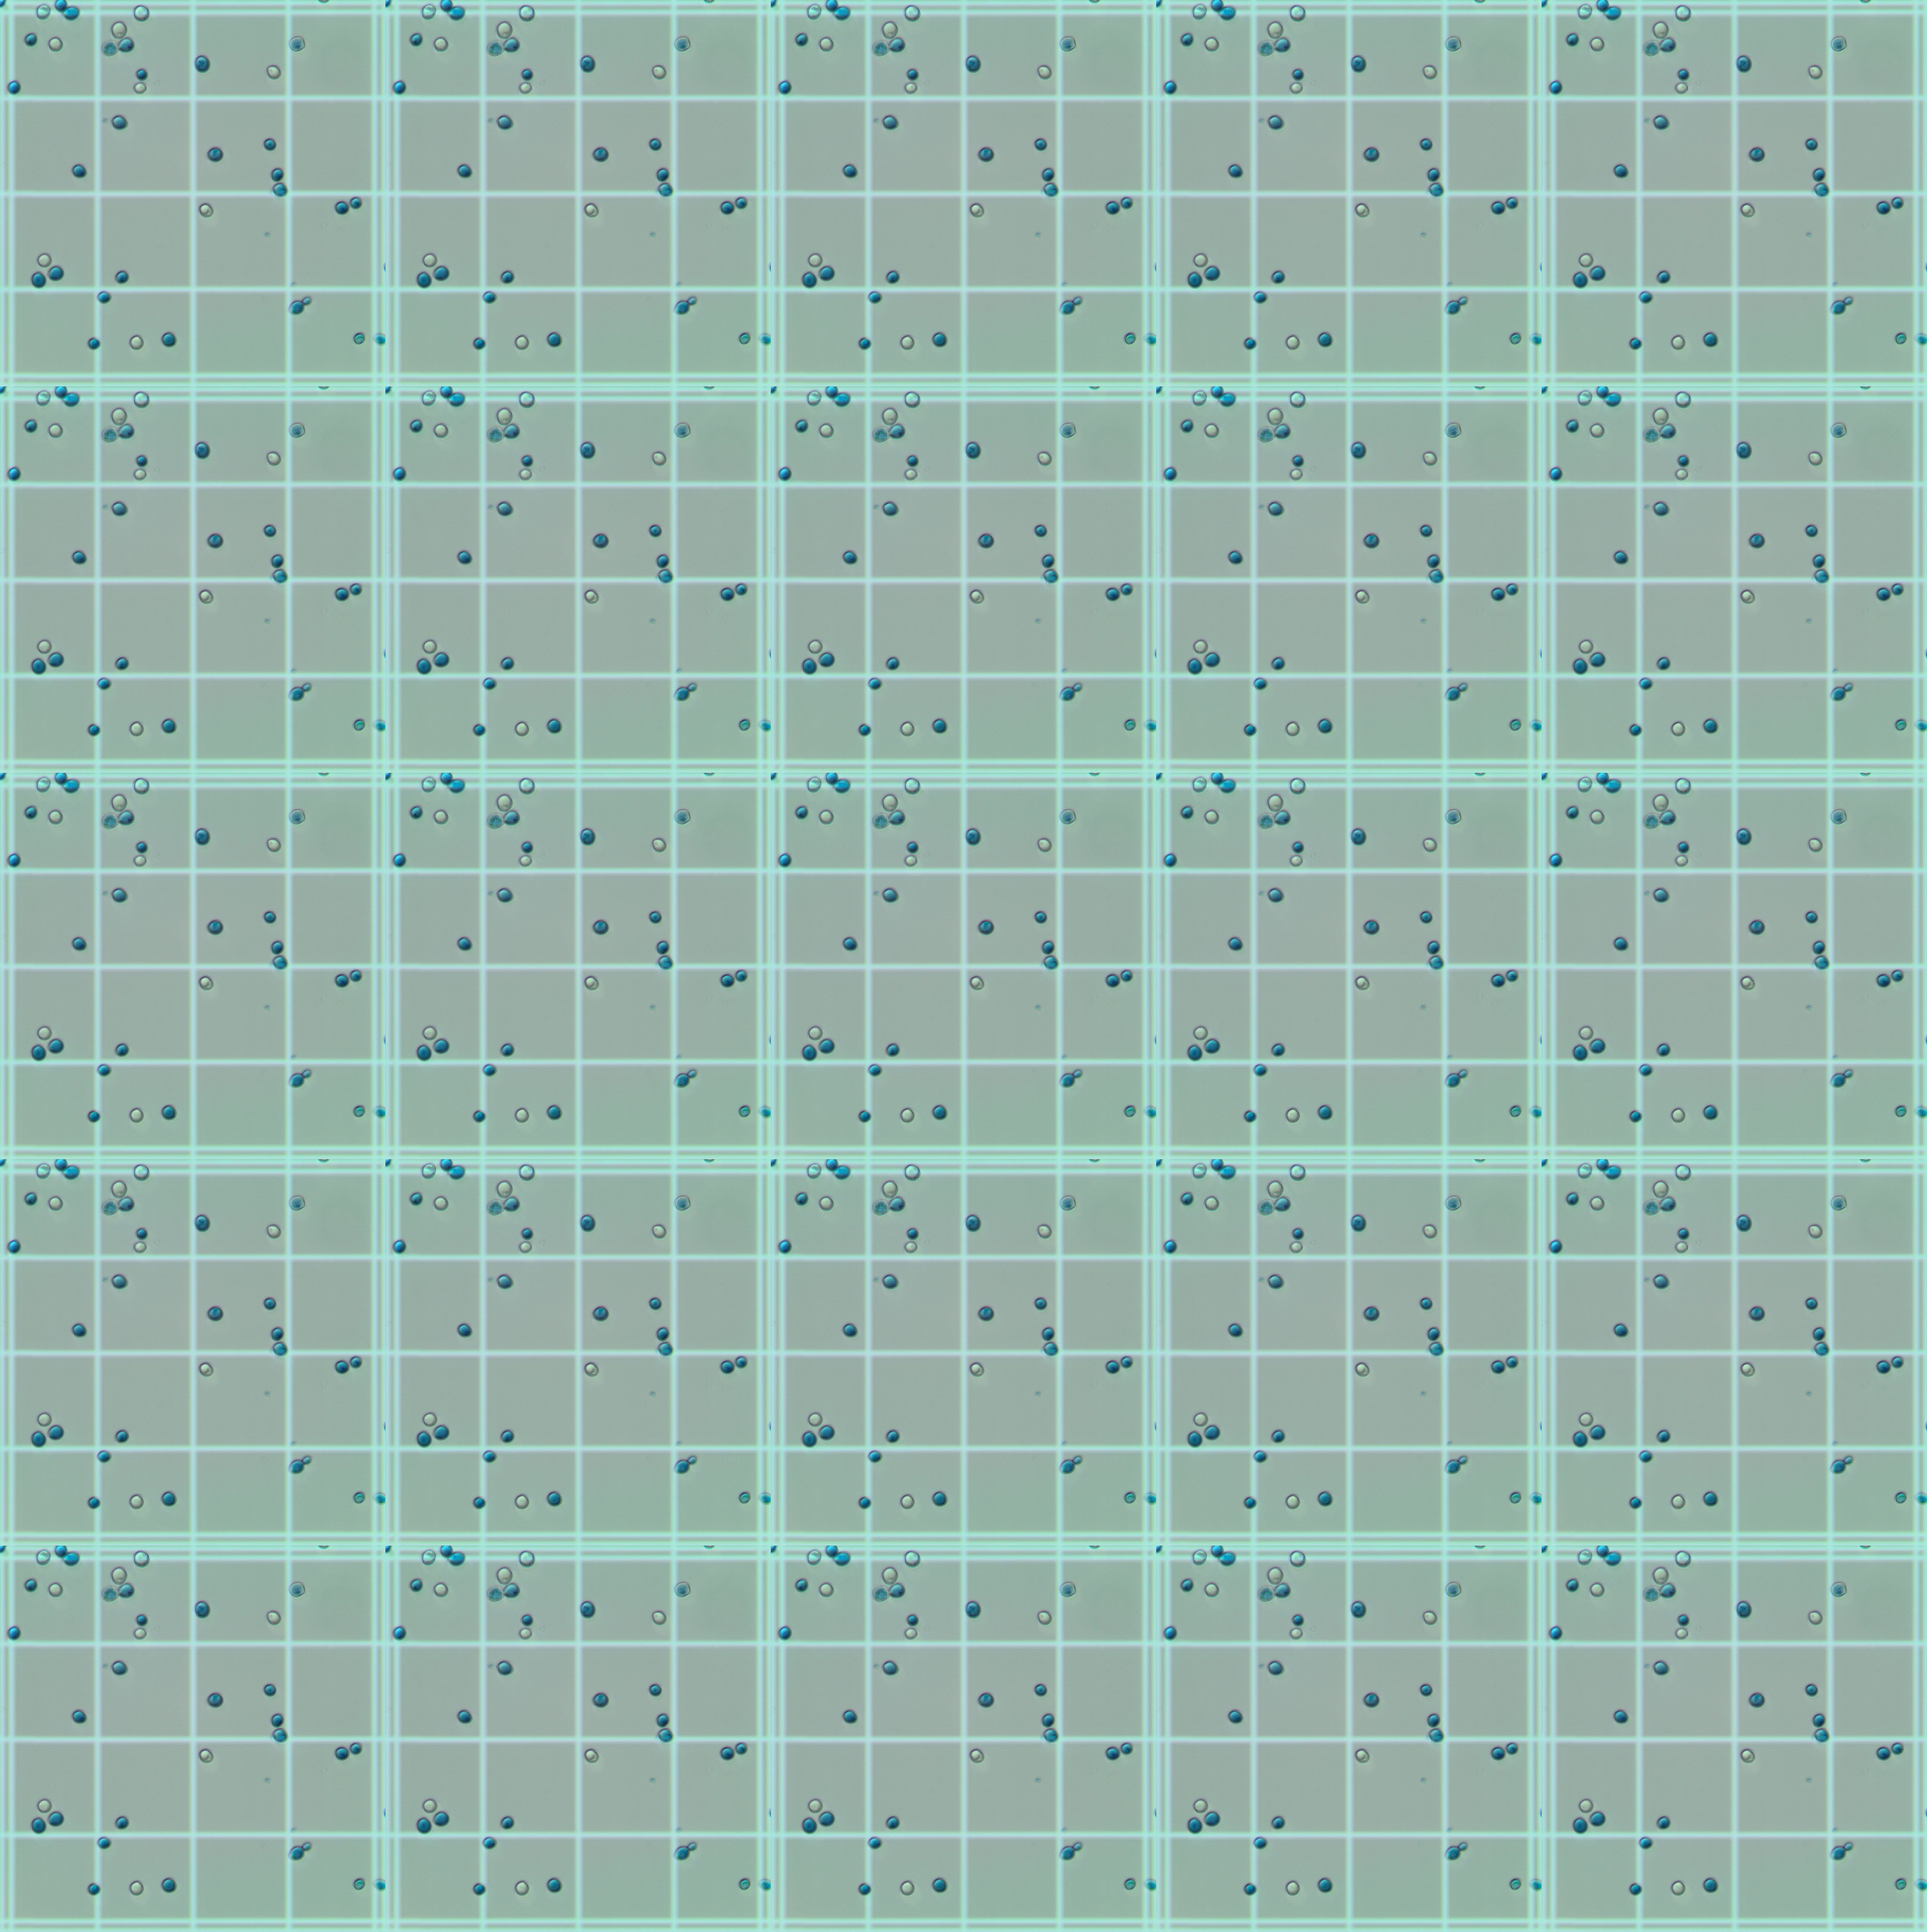 Reconstructed grid image